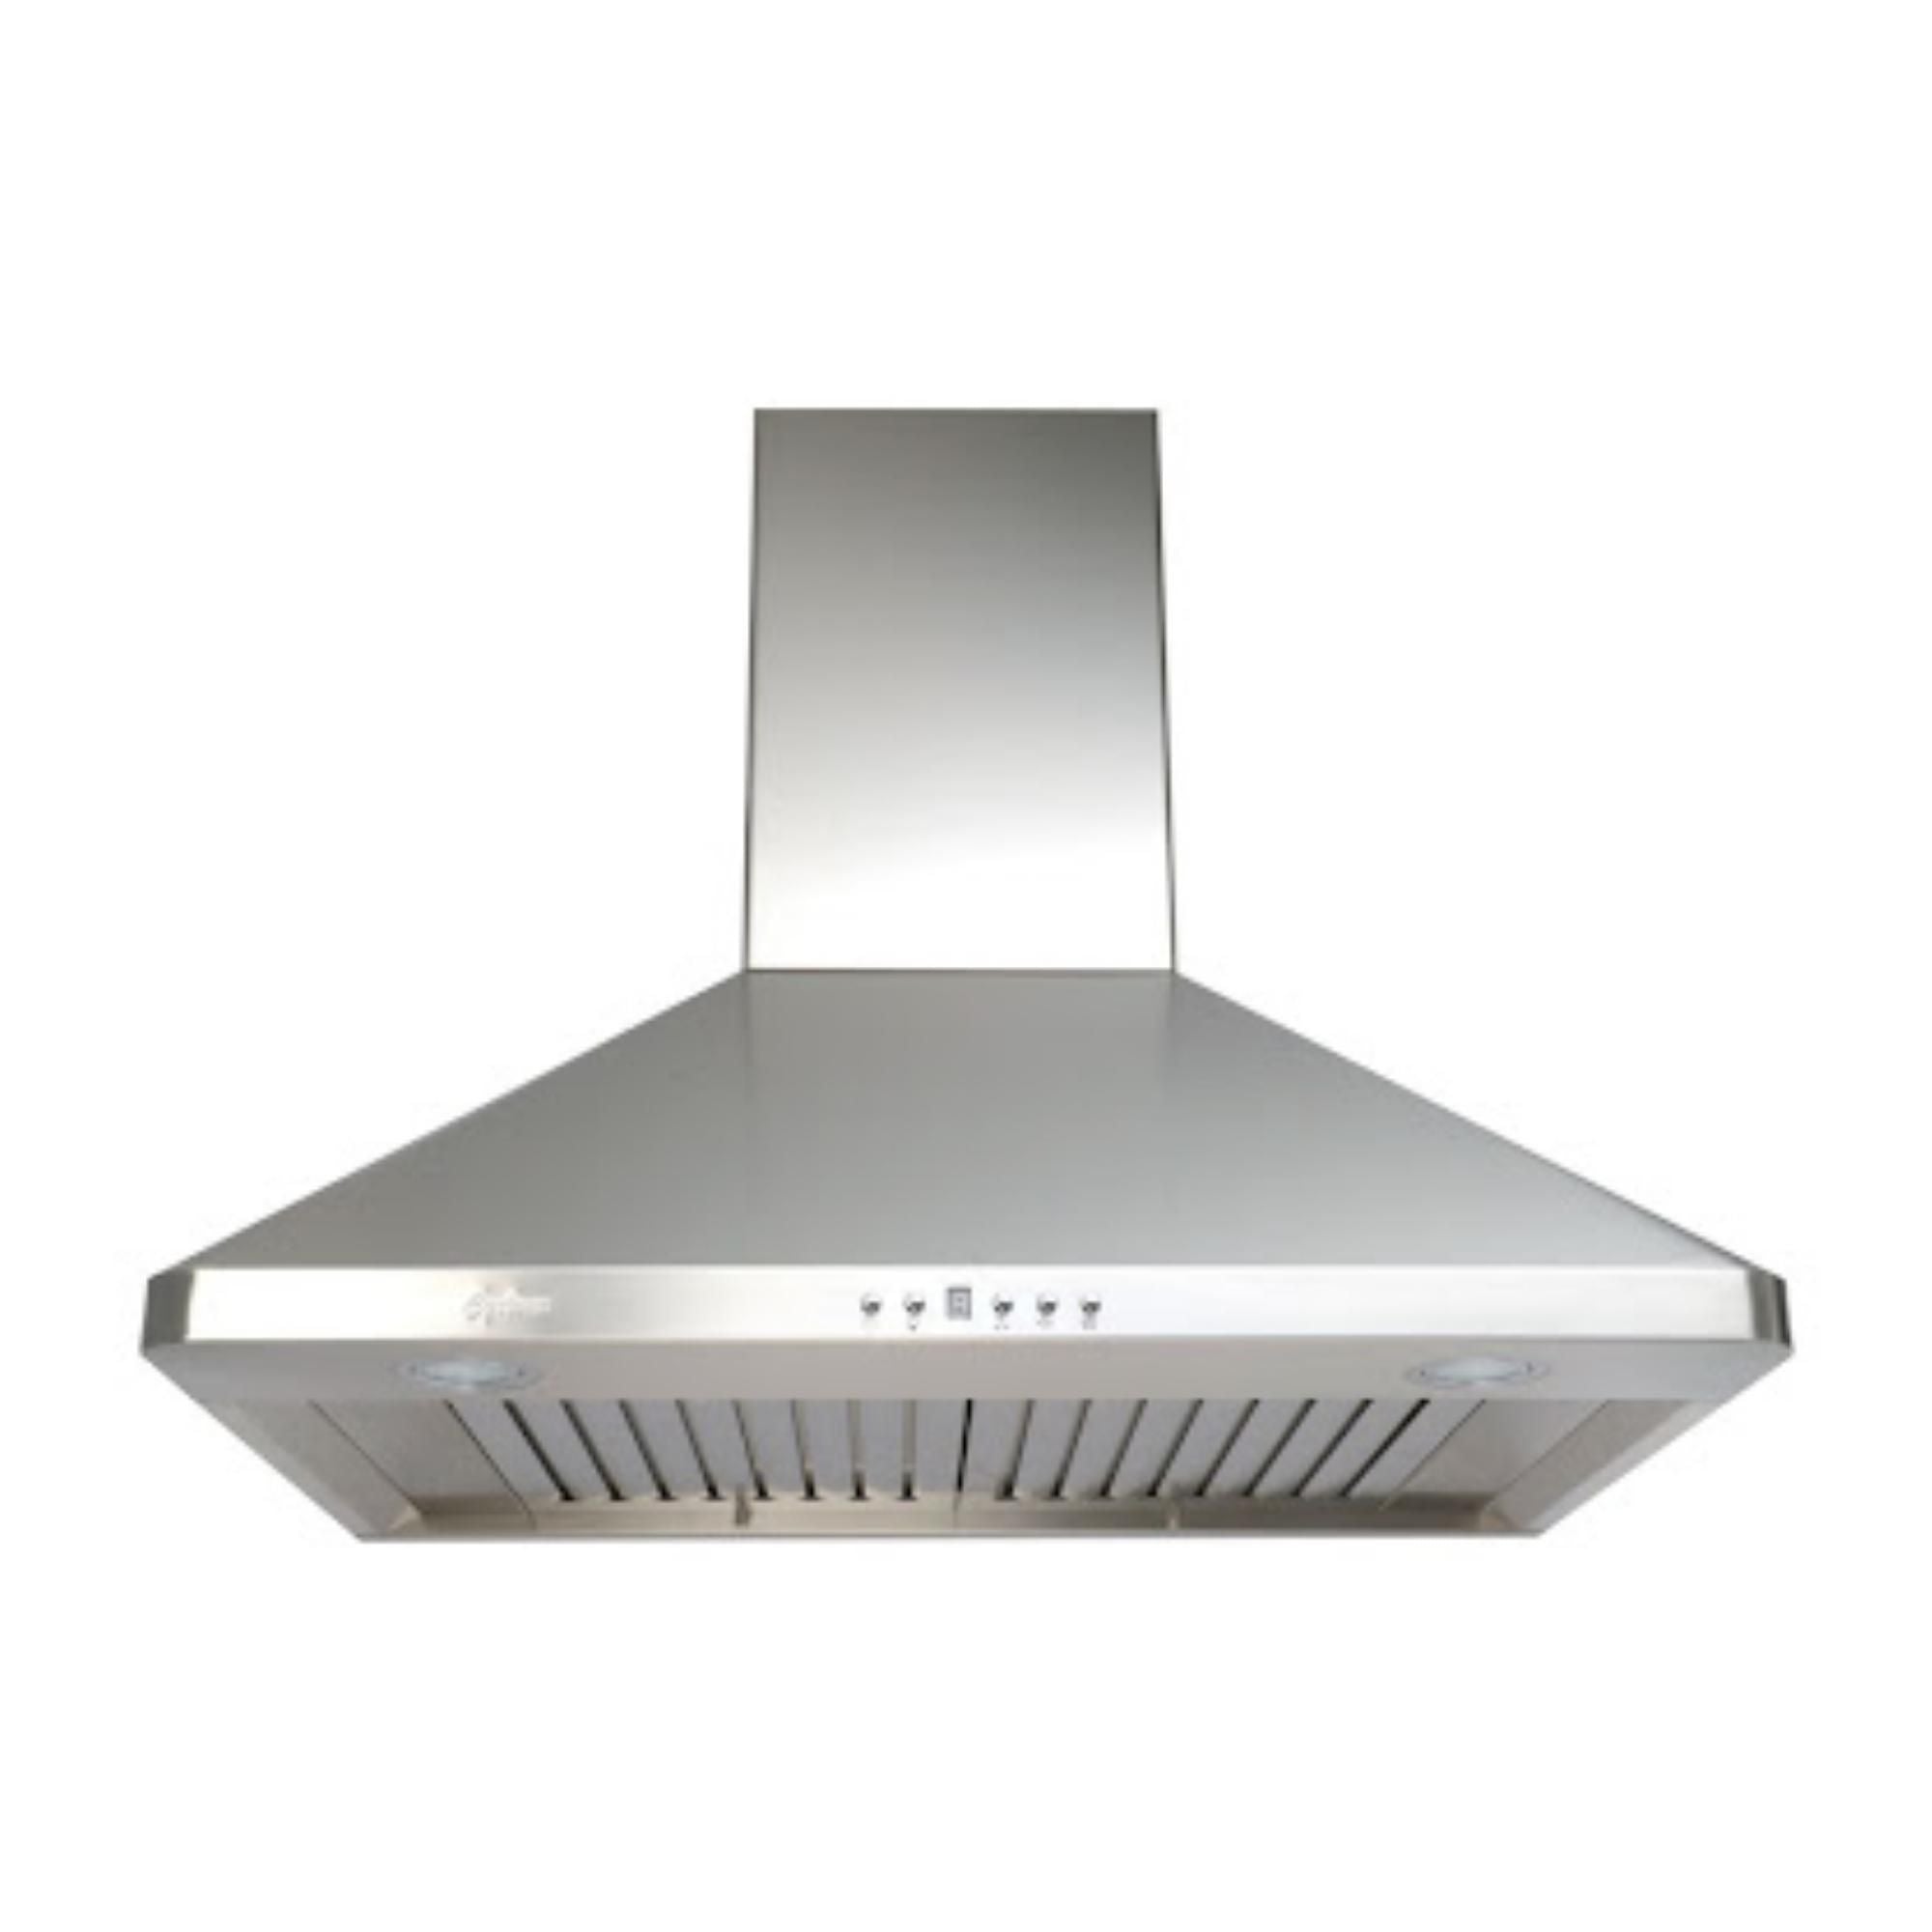 Cyclone - Pro series 30" 300 CFM Pyramid Wall Mount Range Hood in Stainless Steel - SCB31530